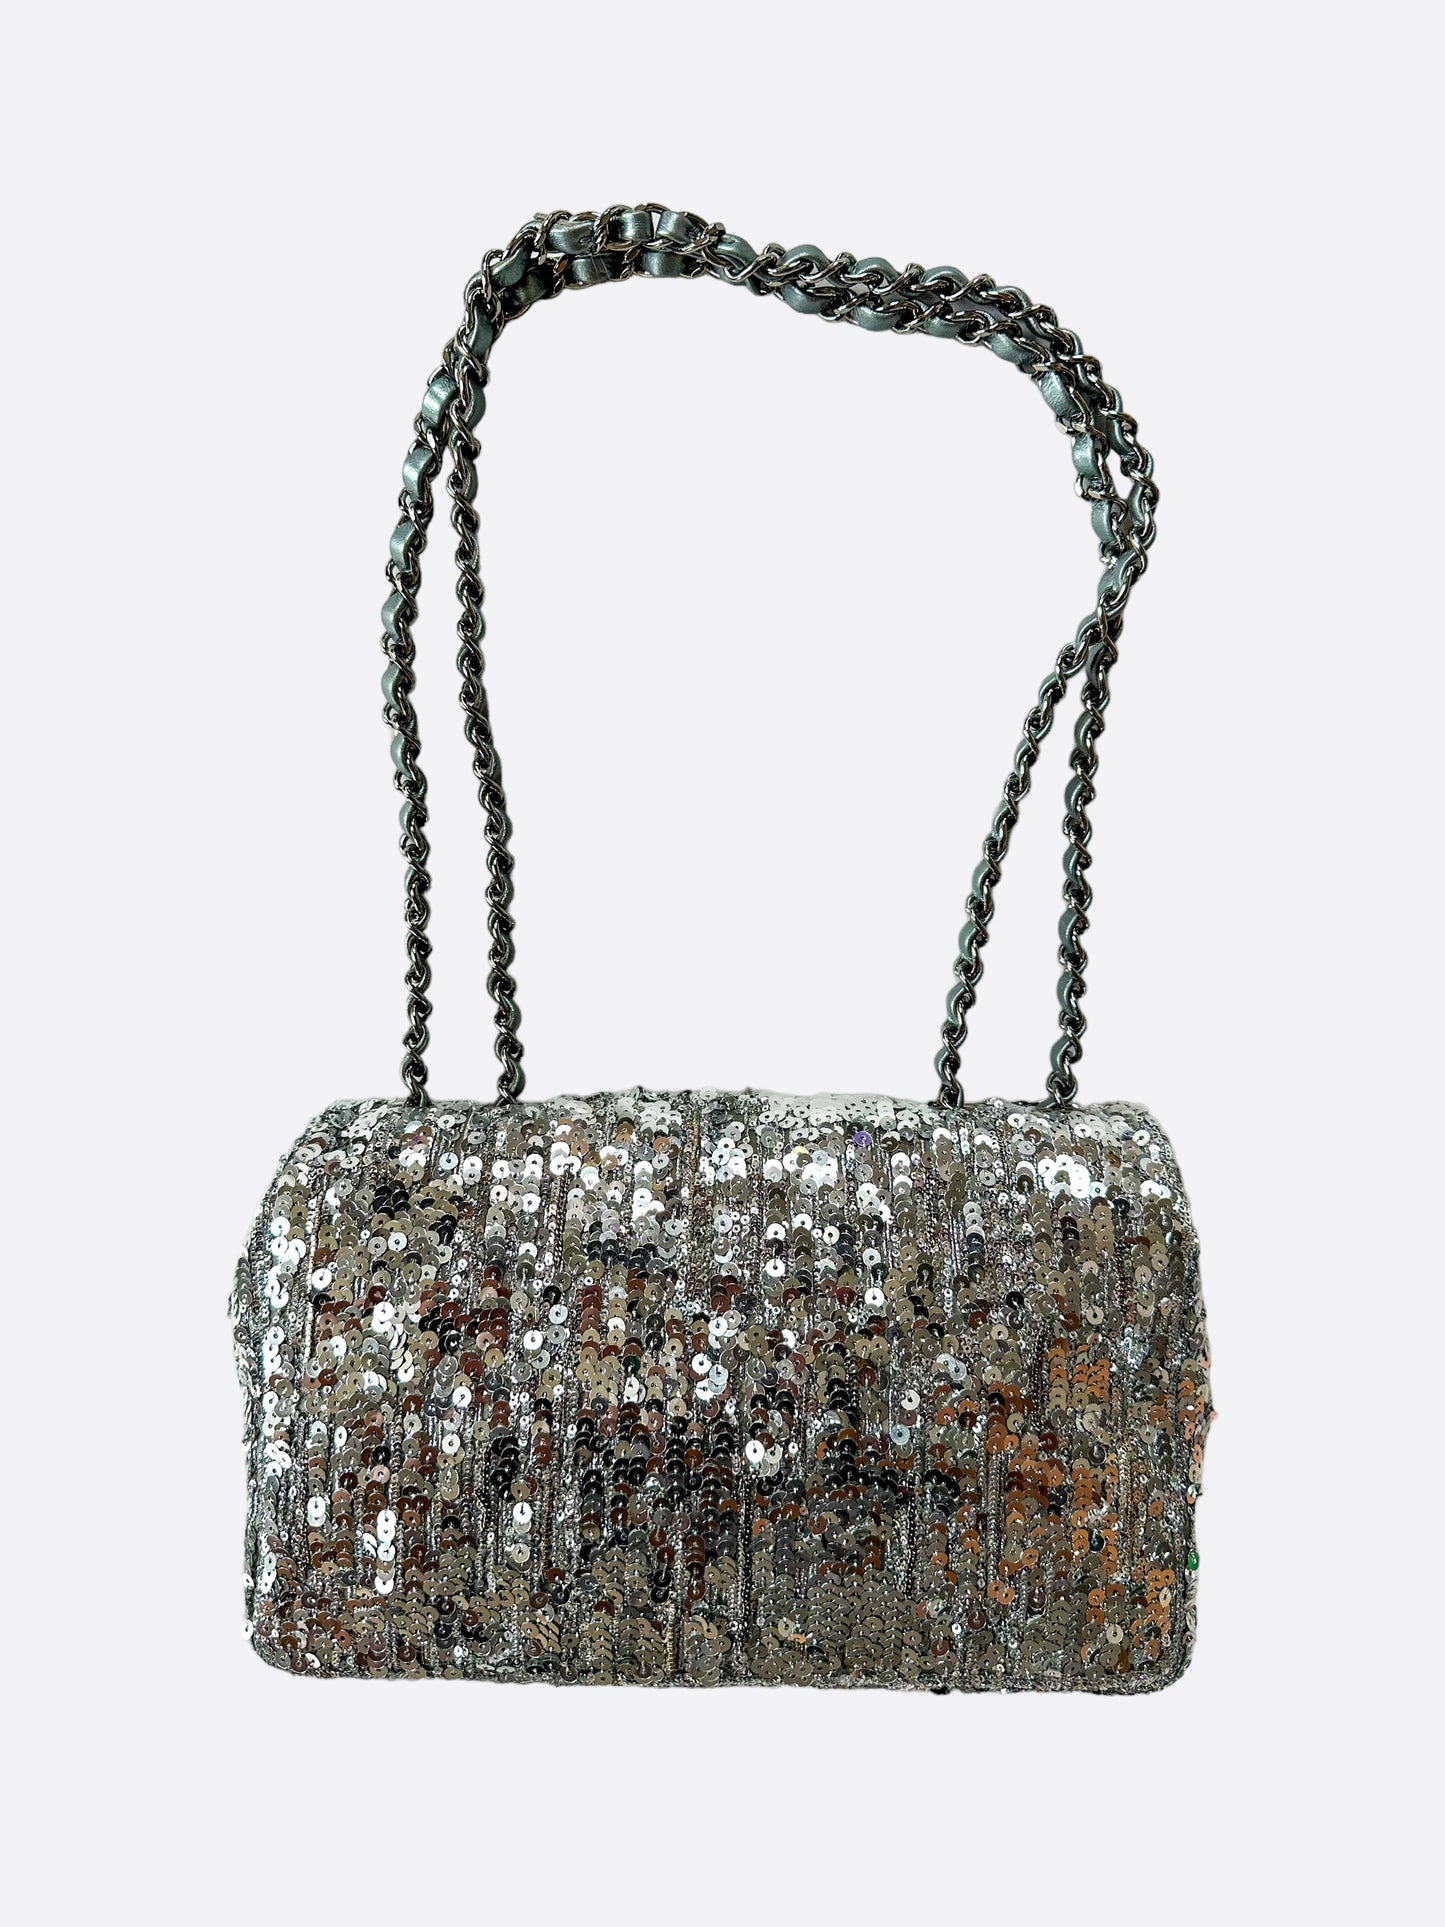 Multicolor Sequin and Lambskin Small Single Flap Bag Black Hardware, 2019